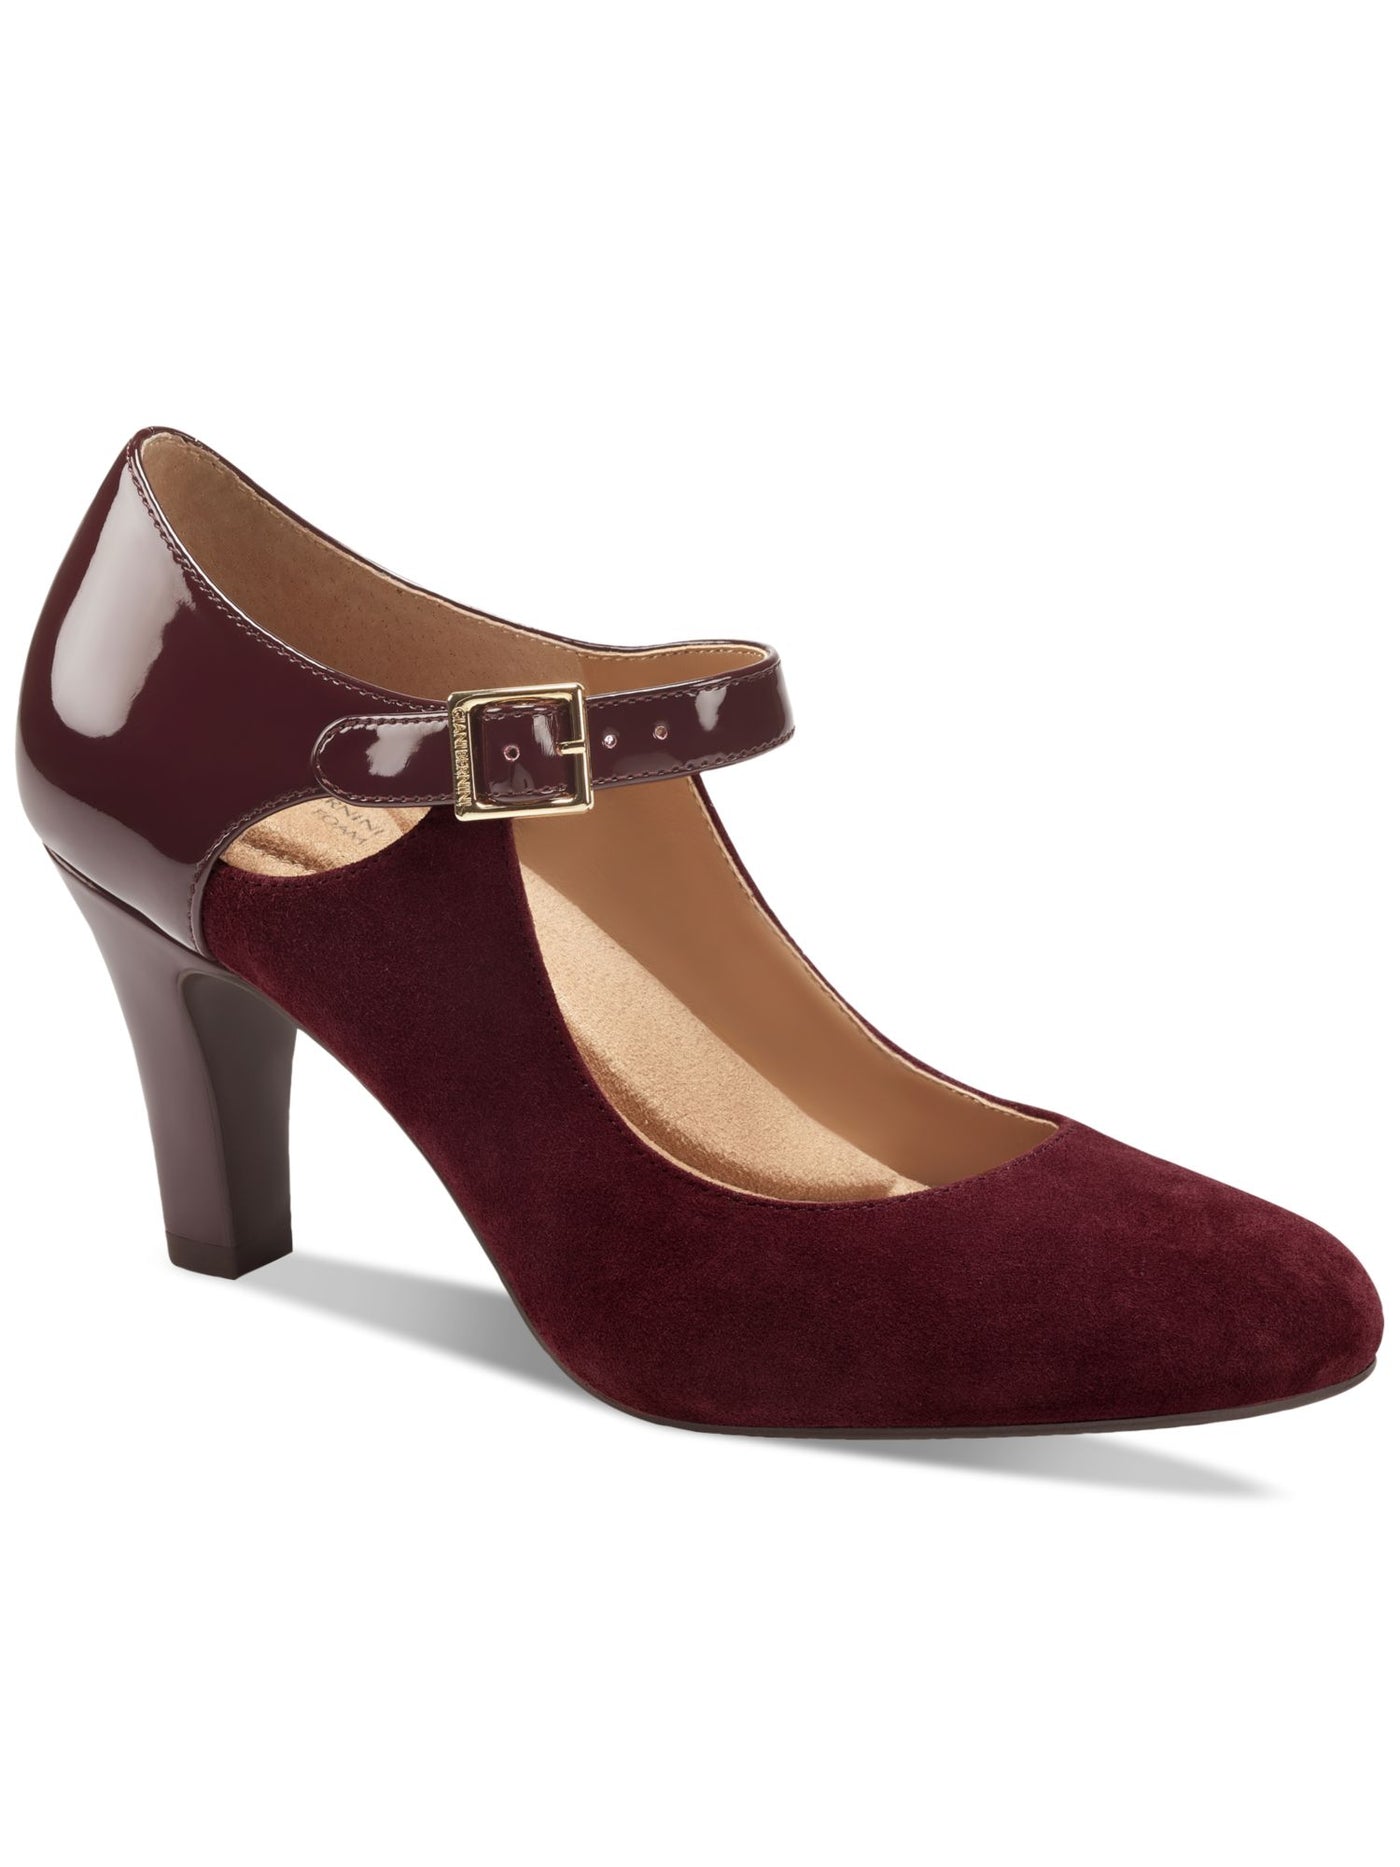 GIANI BERNINI Womens Burgundy Mixed Media Mary Jane Cut Out Cushioned Ankle Strap Arch Support Velmah Round Toe Block Heel Buckle Leather Pumps Shoes 8 M